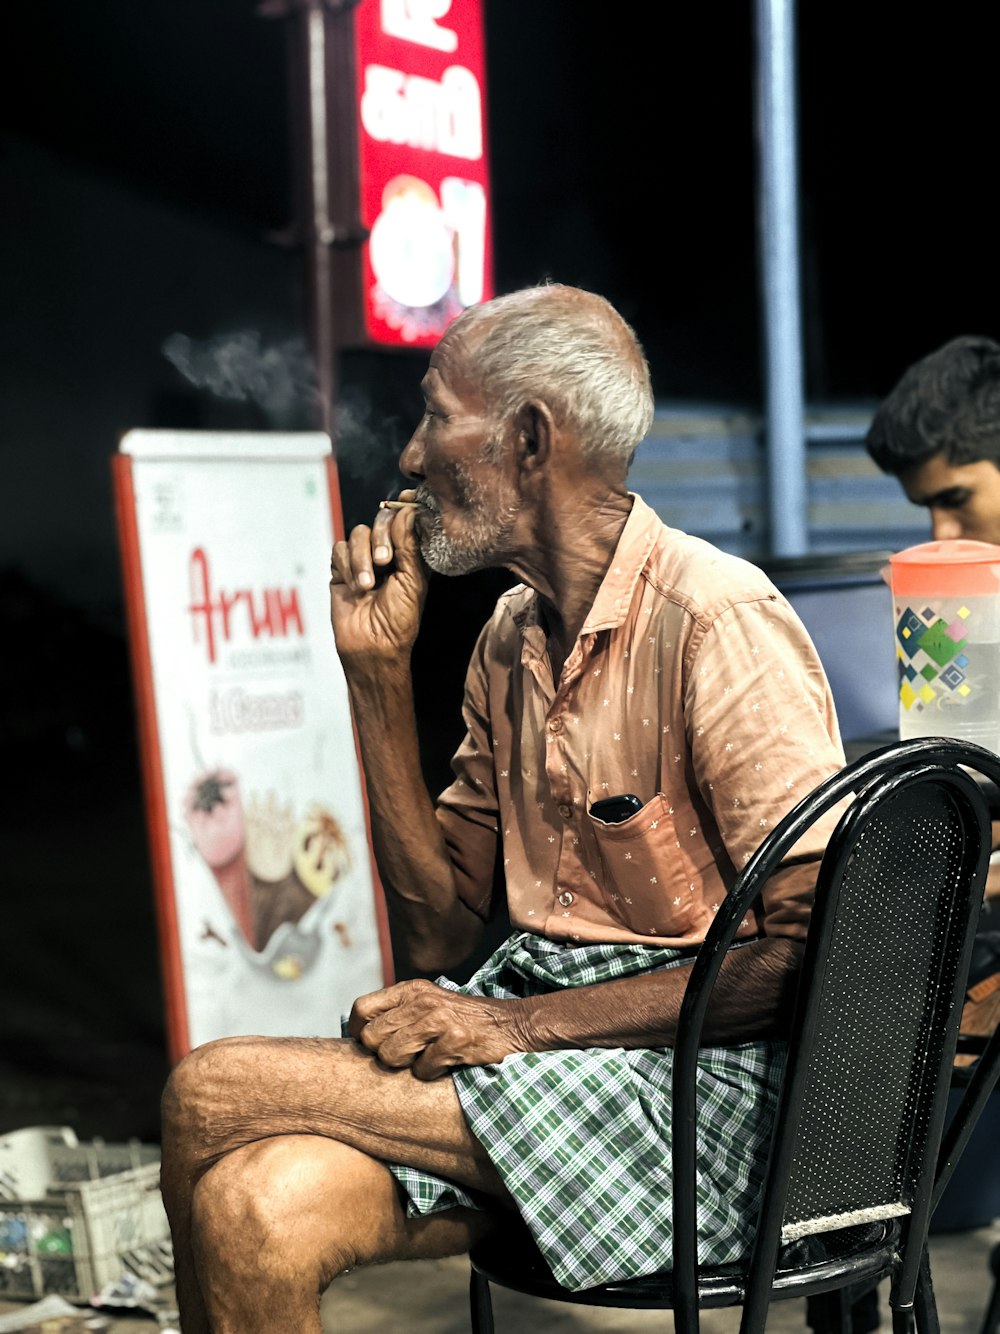 a man sitting on a chair smoking a cigarette